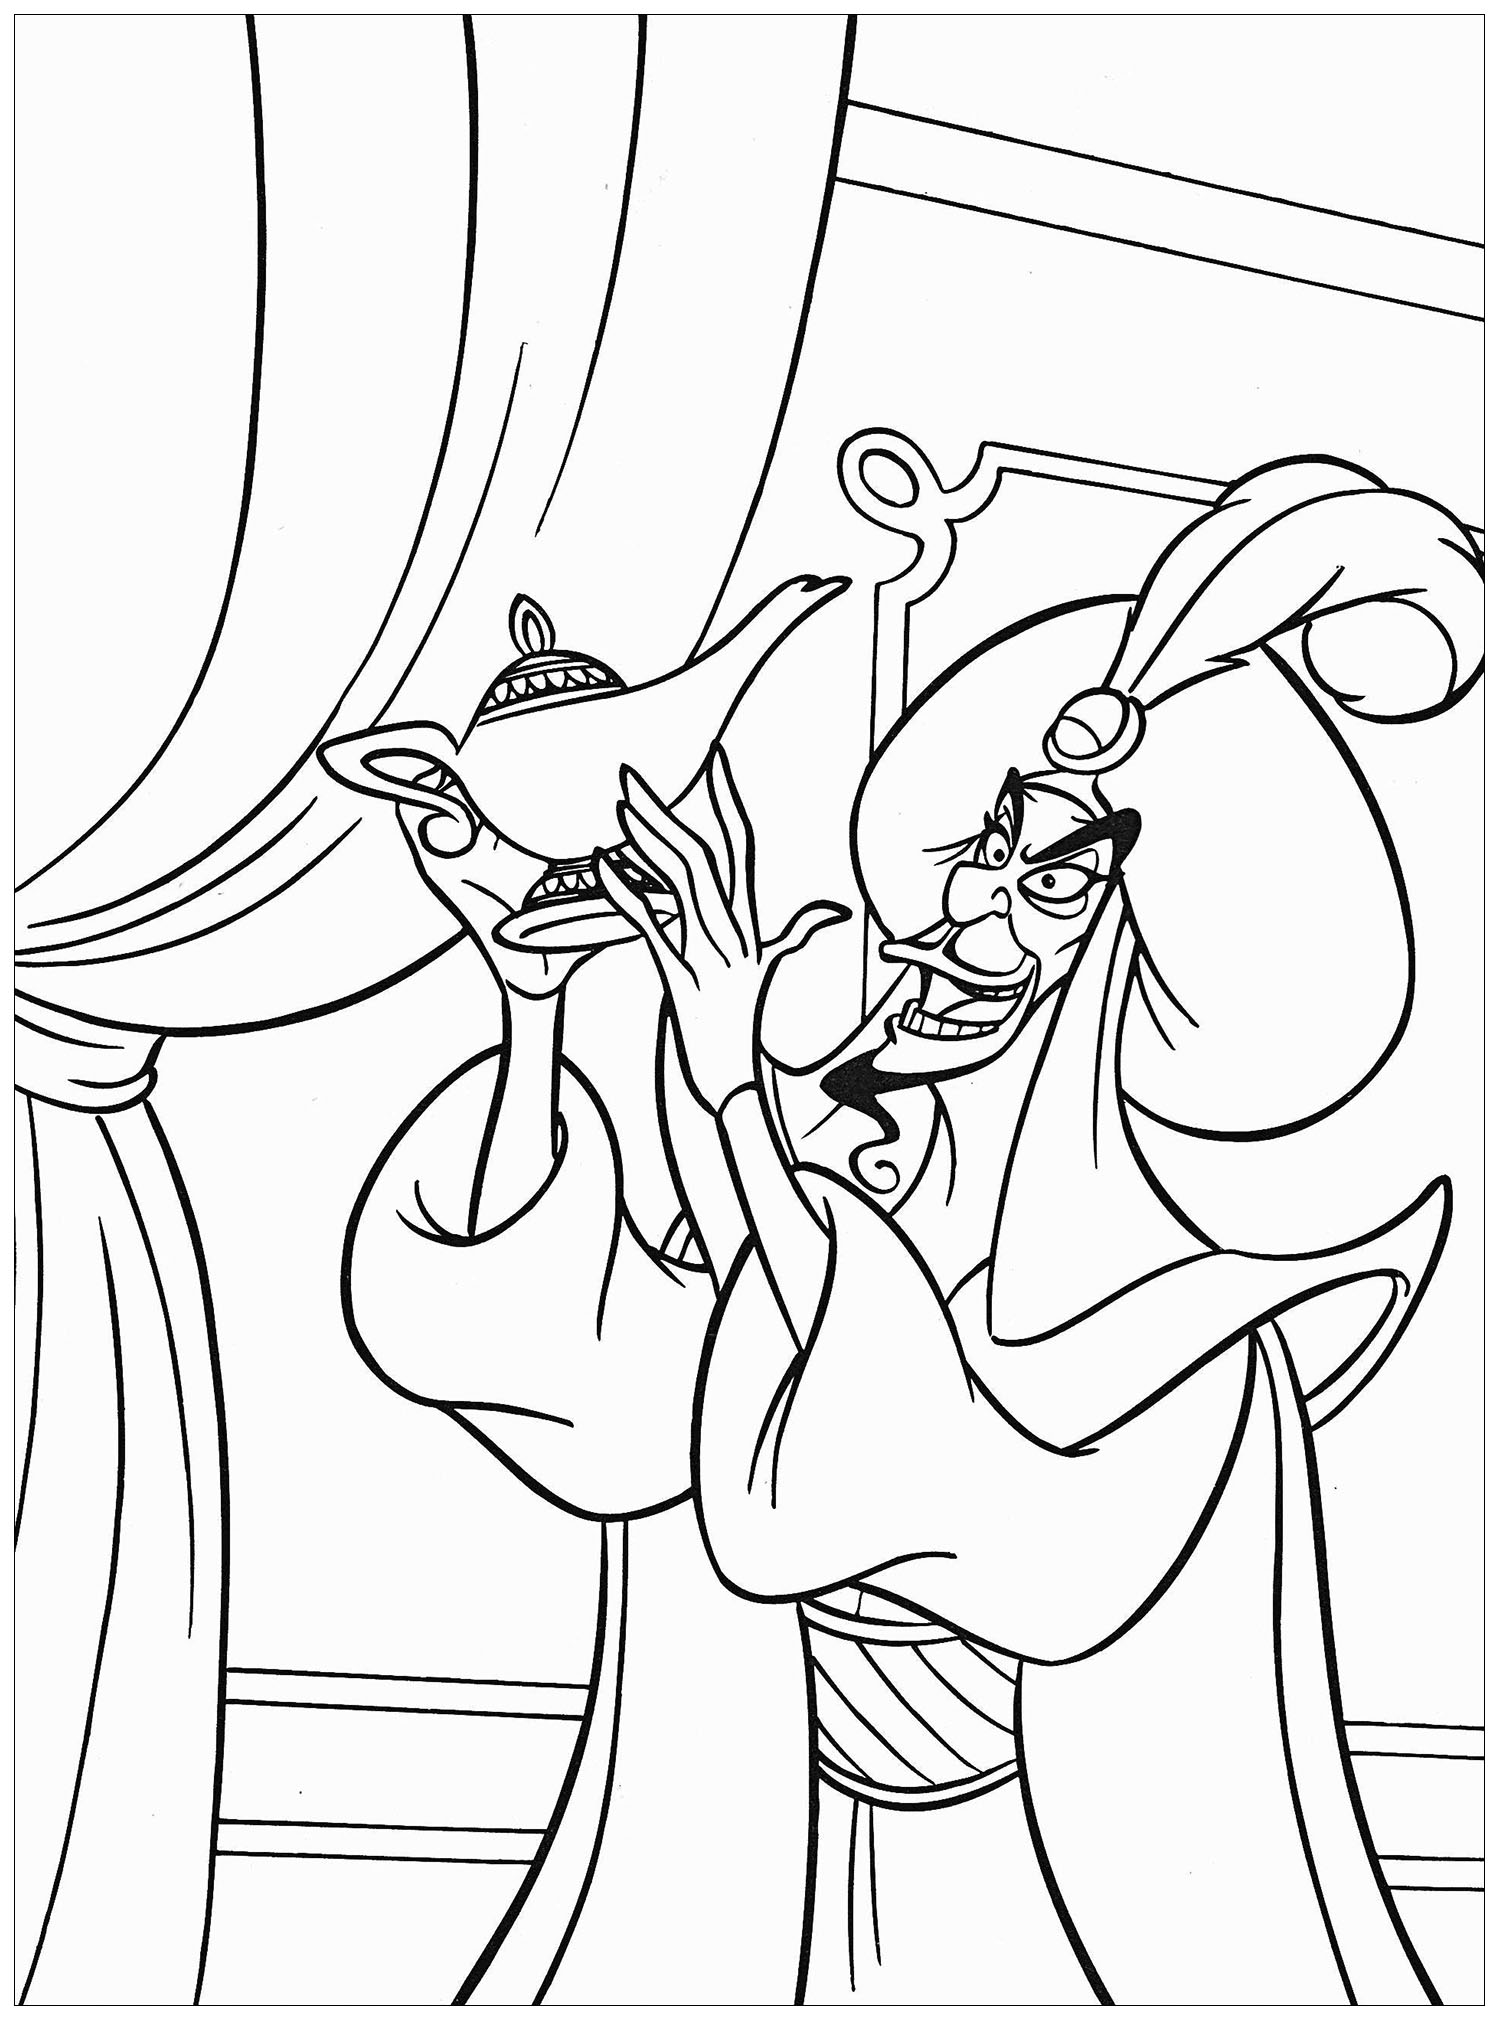 Printable Disney Aladdin Coloring Pages For Kids Images